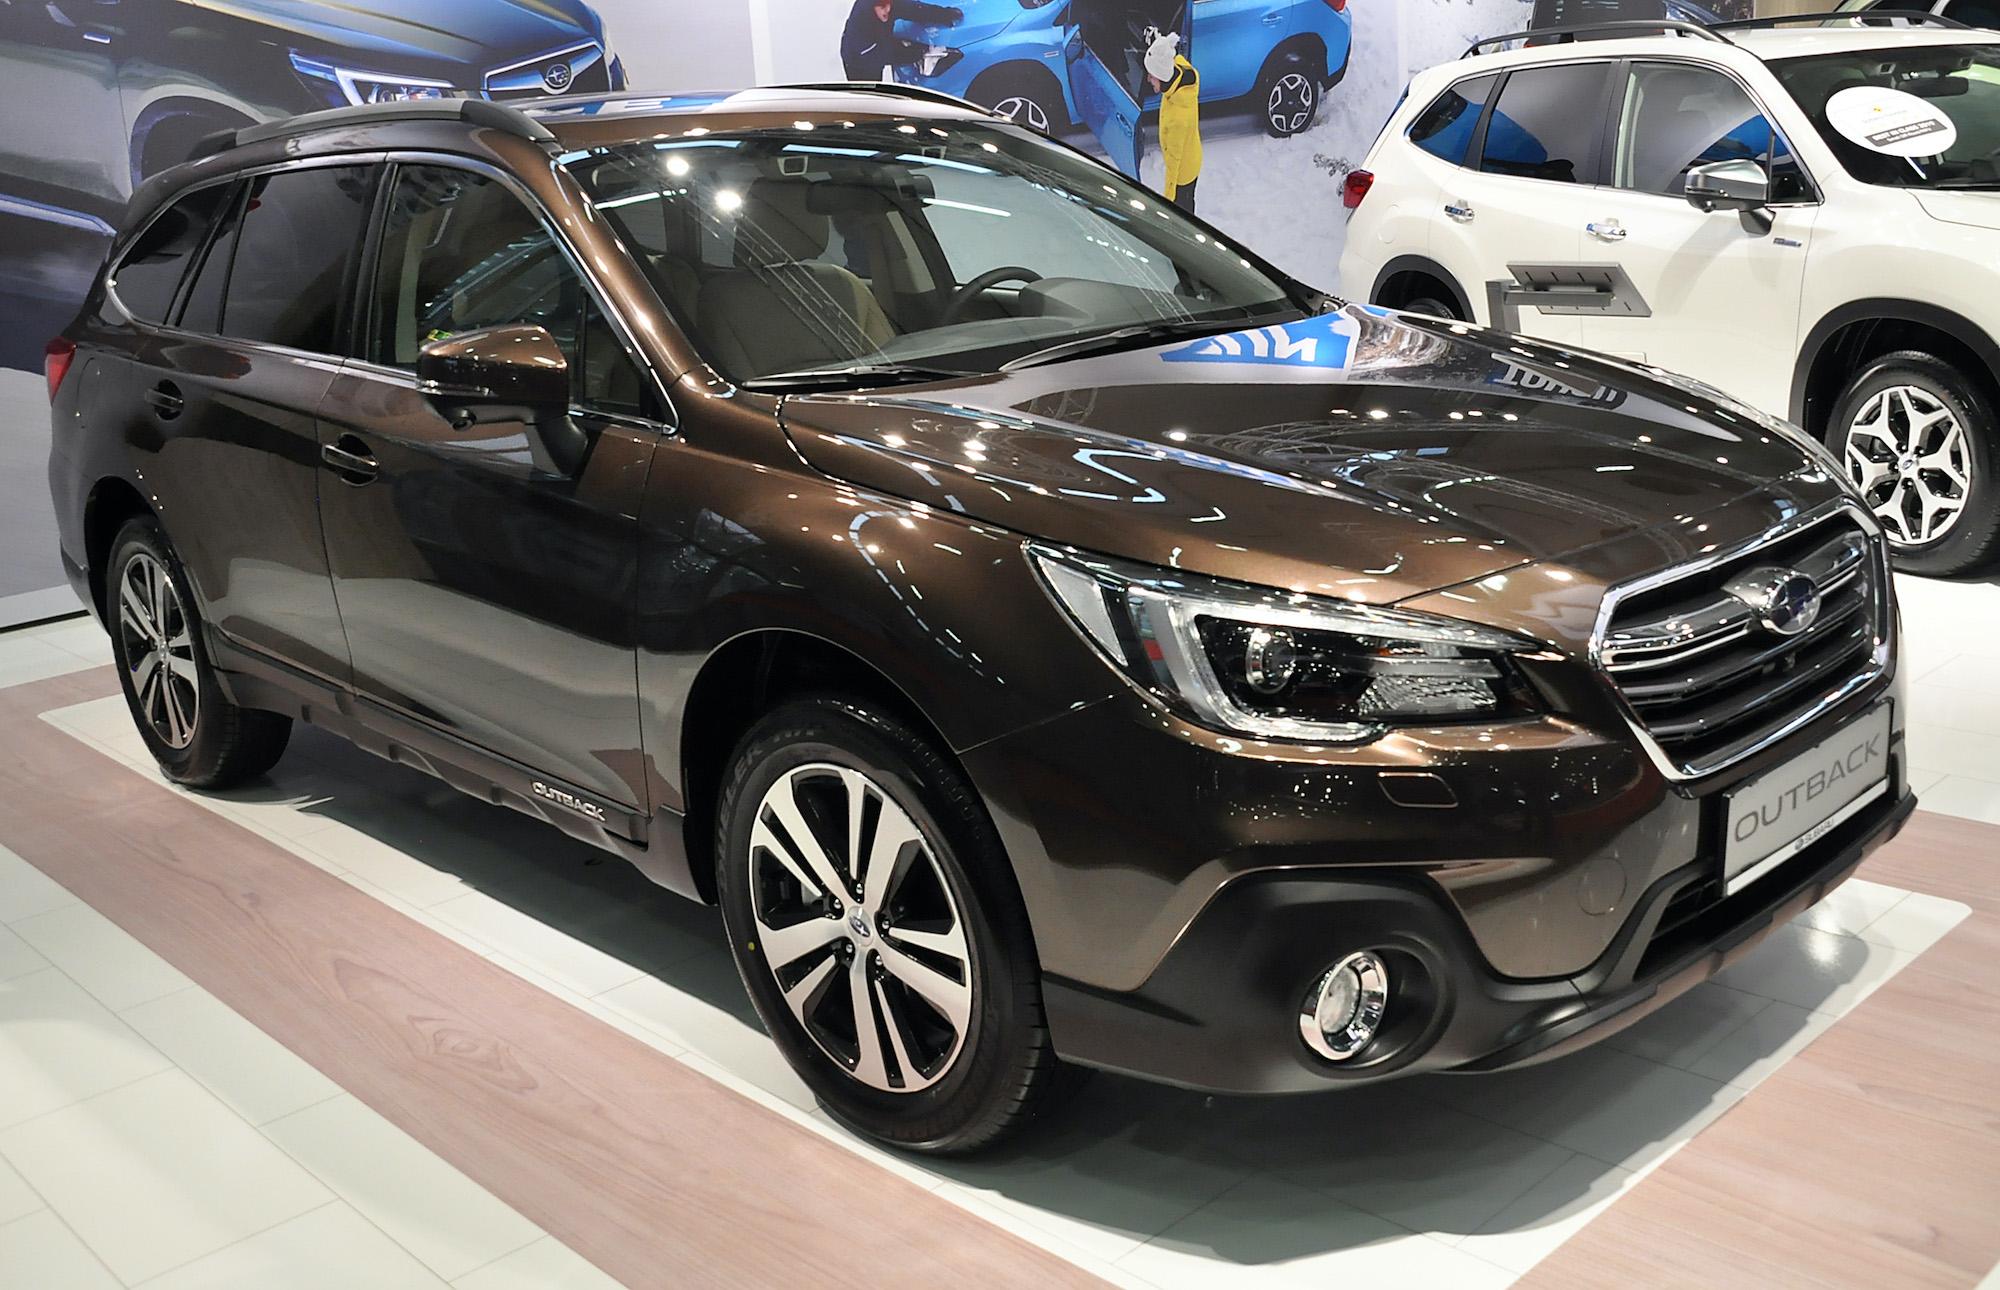 A Subaru Outback is seen during the Vienna Car Show press preview at Messe Wien